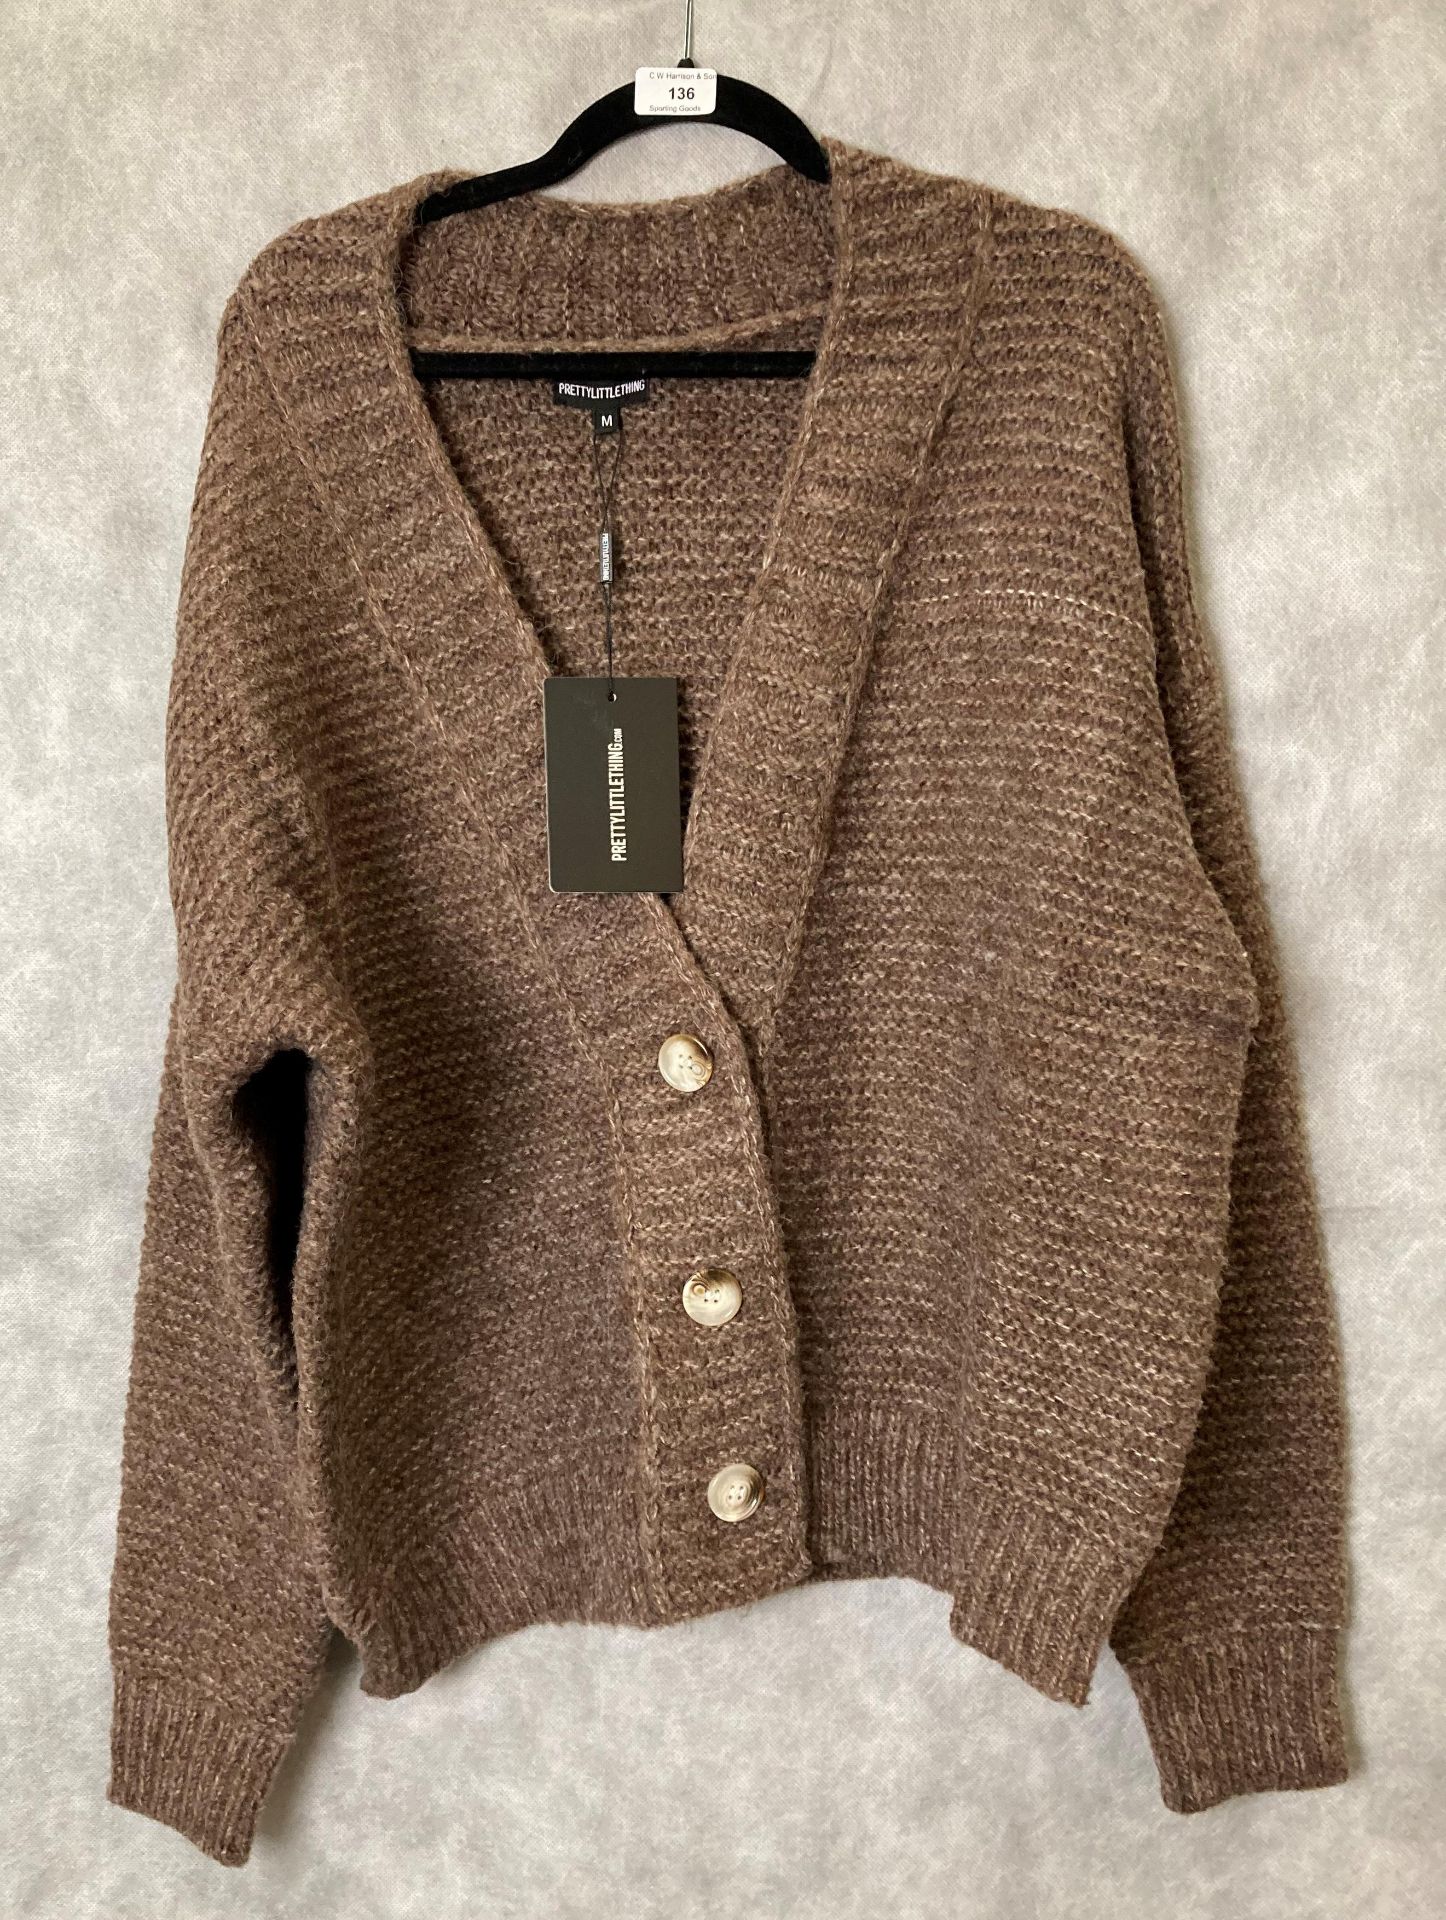 Pretty Little Thing wool rib collar cardigan in chocolate, size M (in packaging,